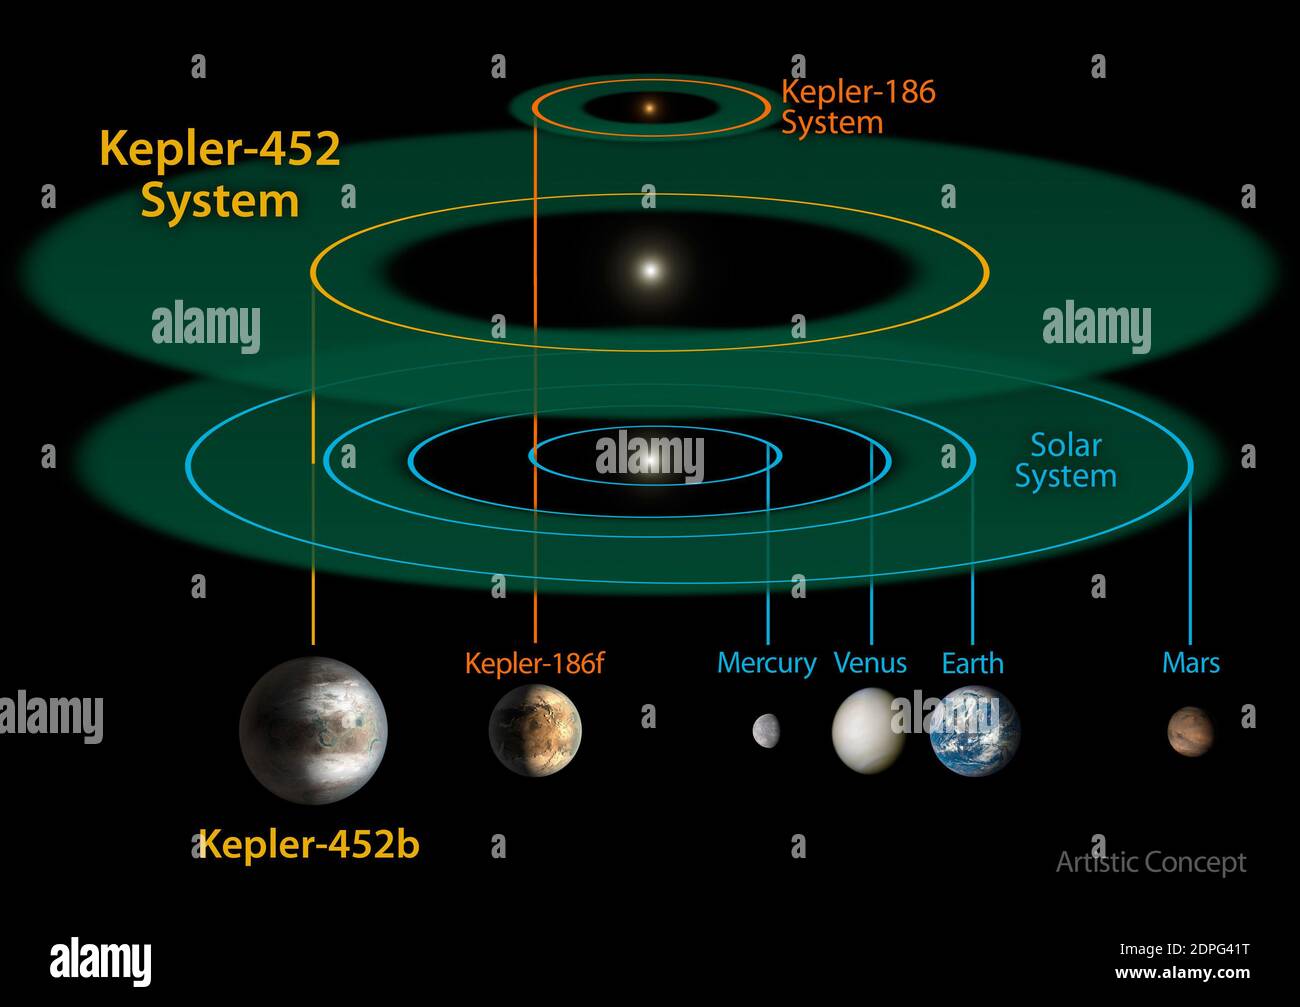 OUTER SPACE Kepler-452b — July 23, 2015 -- This size and scale of the Kepler-452 system compared alongside the Kepler-186 system and the solar system. Kepler-186 is a miniature solar system that would fit entirely inside the orbit of Mercury. The habitable zone of Kepler-186 is very small compared to that of Kepler-452 or the sun because it is a much smaller, cooler star. The size and extent of the habitable zone of Kepler-452 is nearly the same as that of the sun, but is slightly bigger because Kepler-452 is somewhat older, bigger and brighter. The size of the orbit of Kepler-452b is nearly t Stock Photo